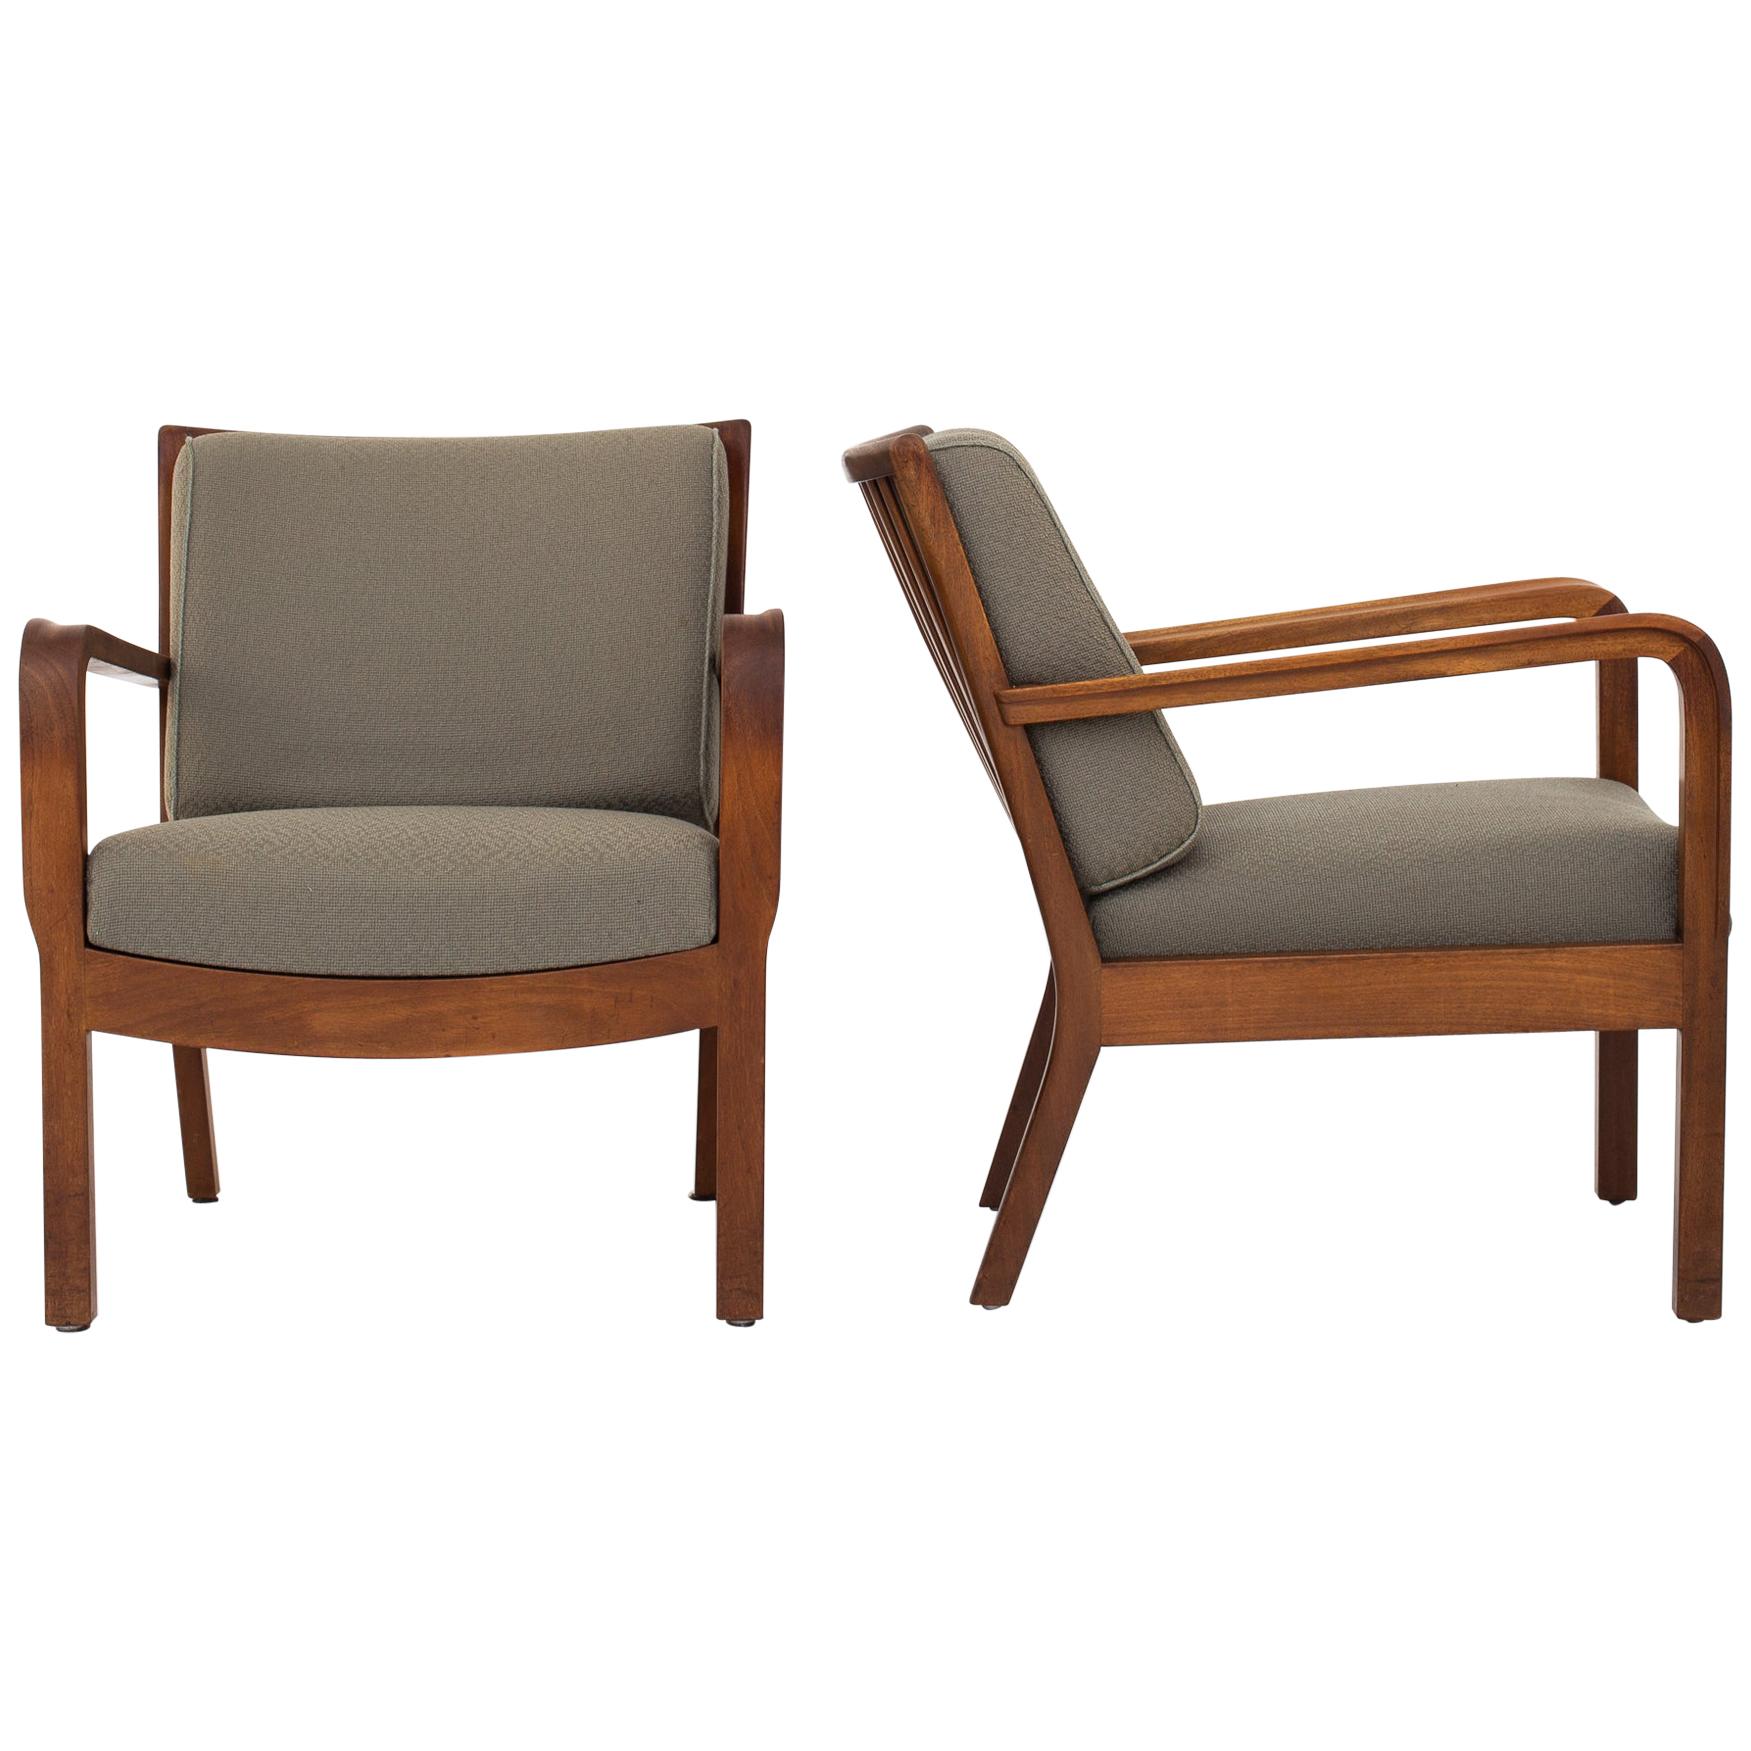 Pair of Easy Chairs by Tove & Edvard Kindt Larsen.